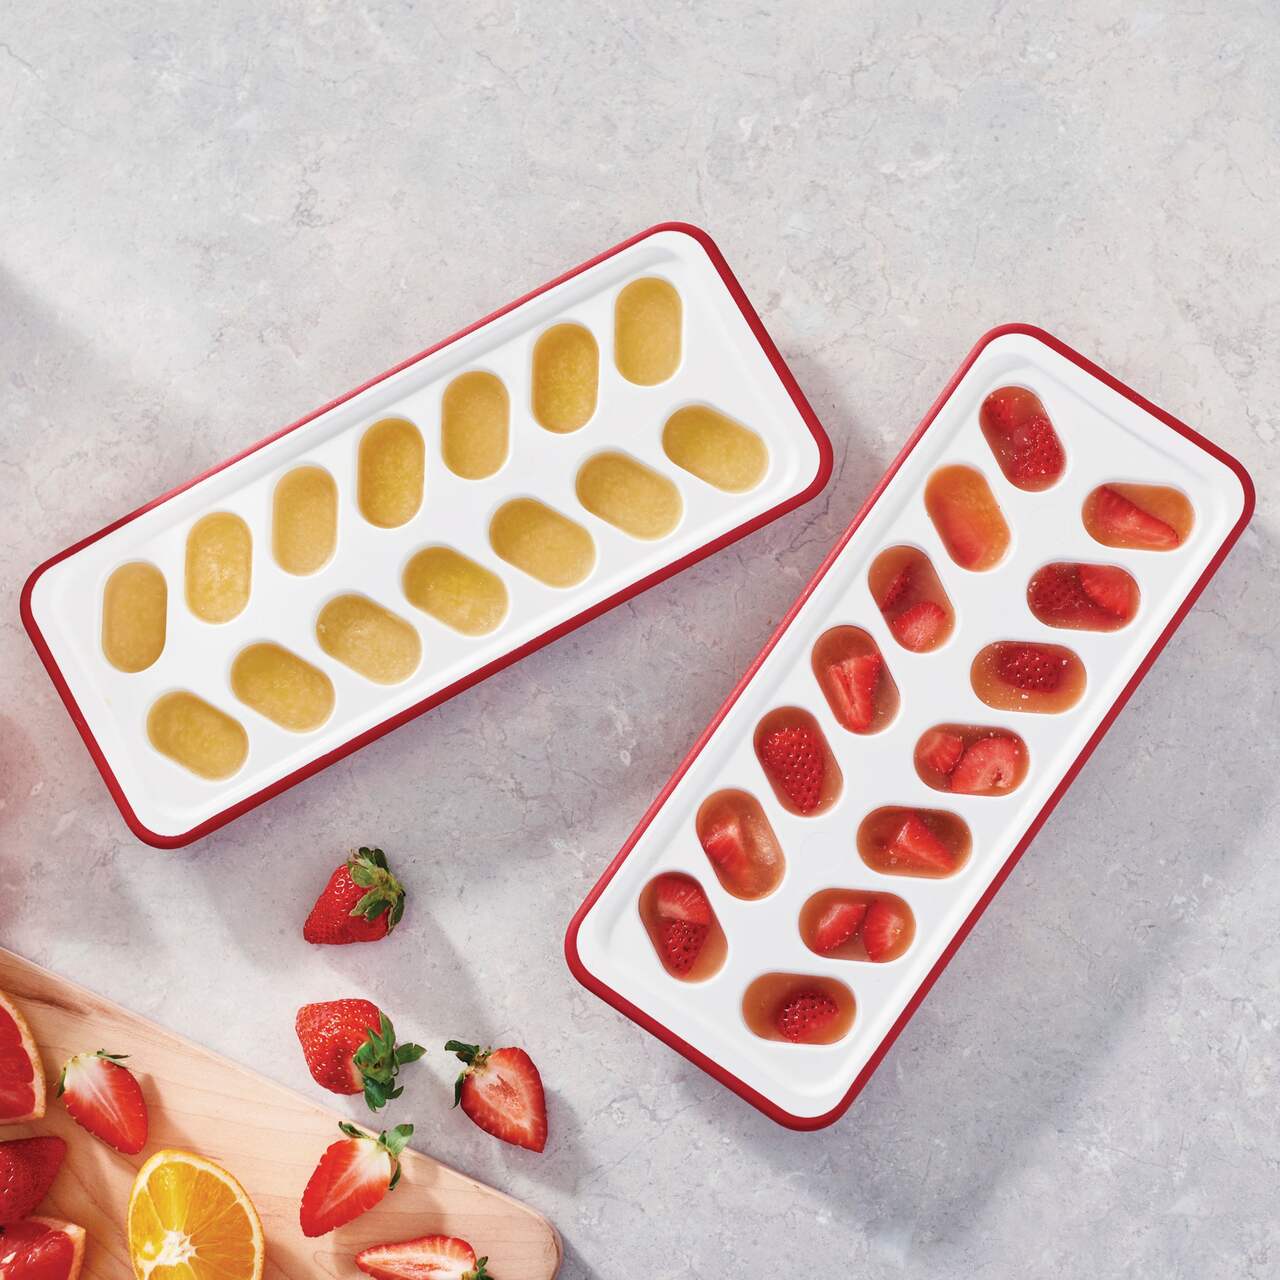 Rubbermaid Easy Release Flexible Dual-Material Ice Cube Tray 